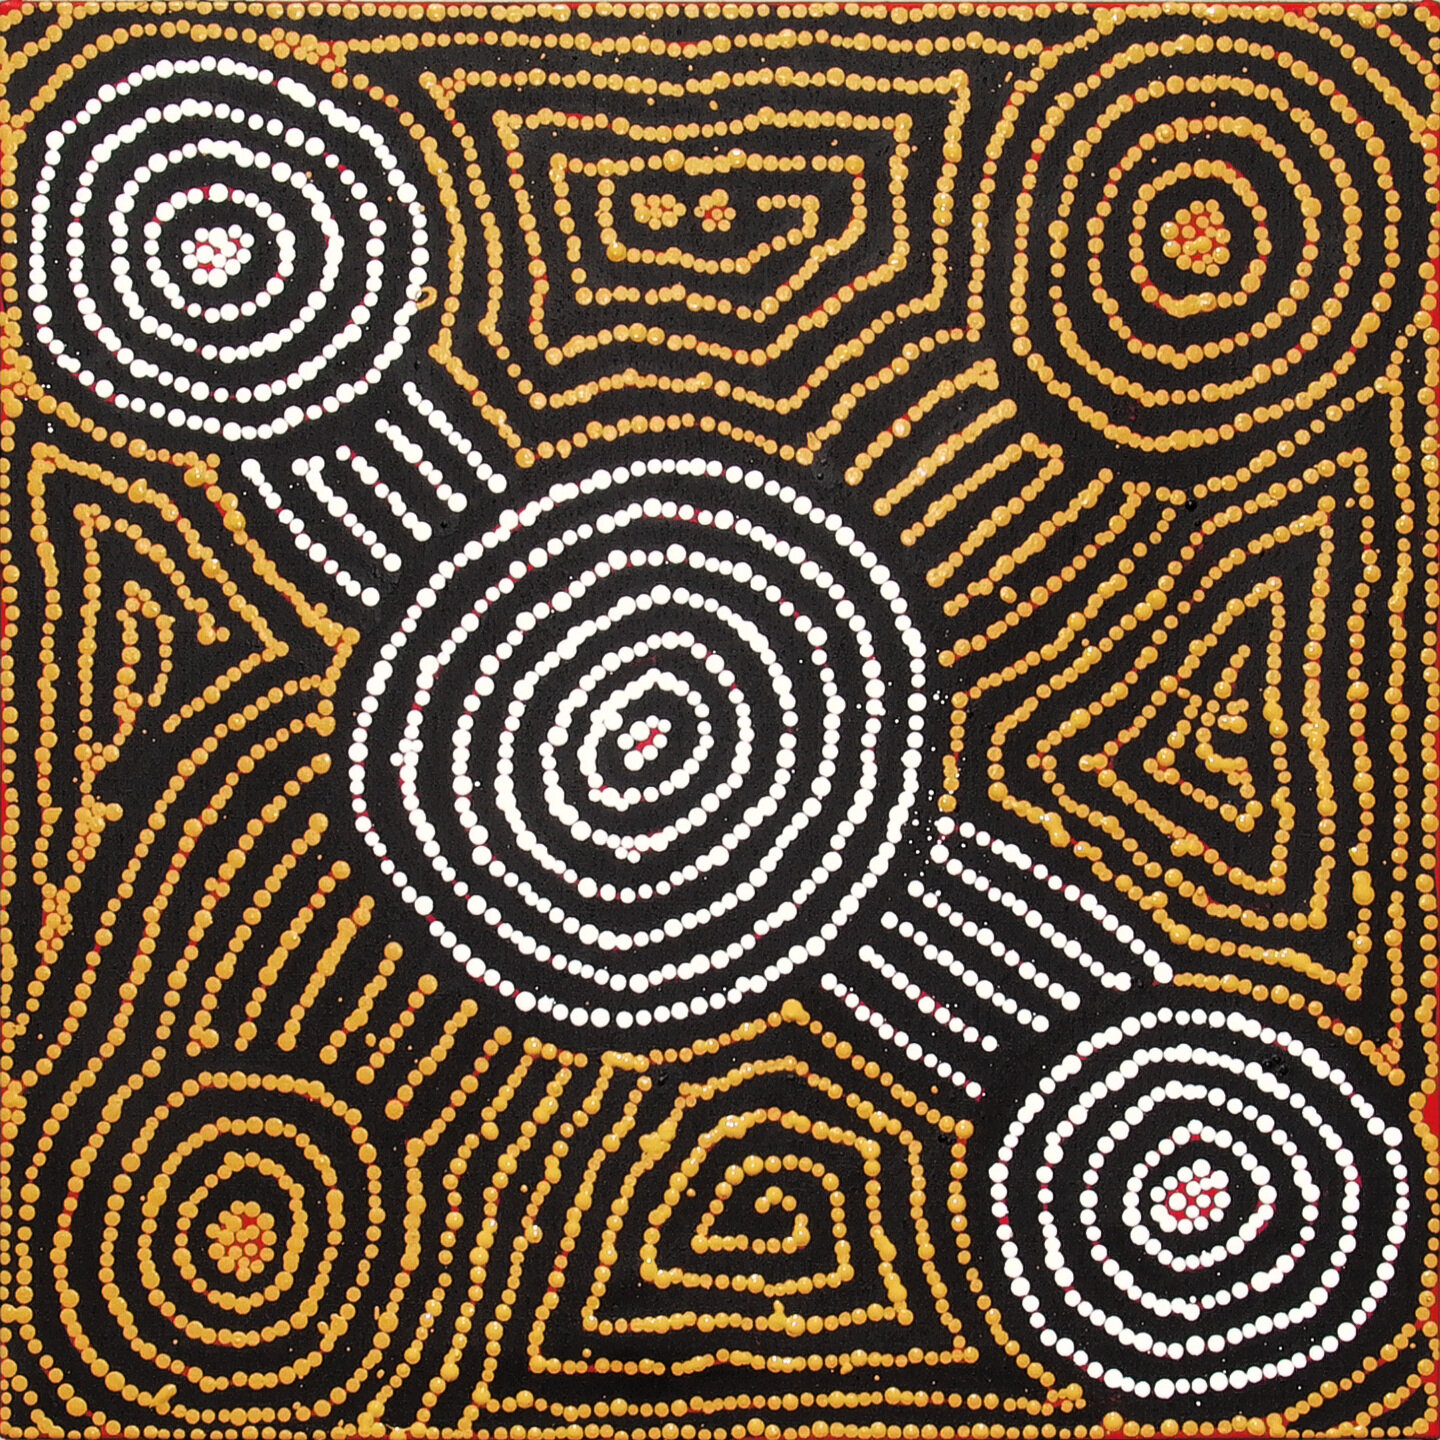 Tingari Cycle (2006) by Barney Campbell Tjakamarra 61x61cm Cat 9496BC